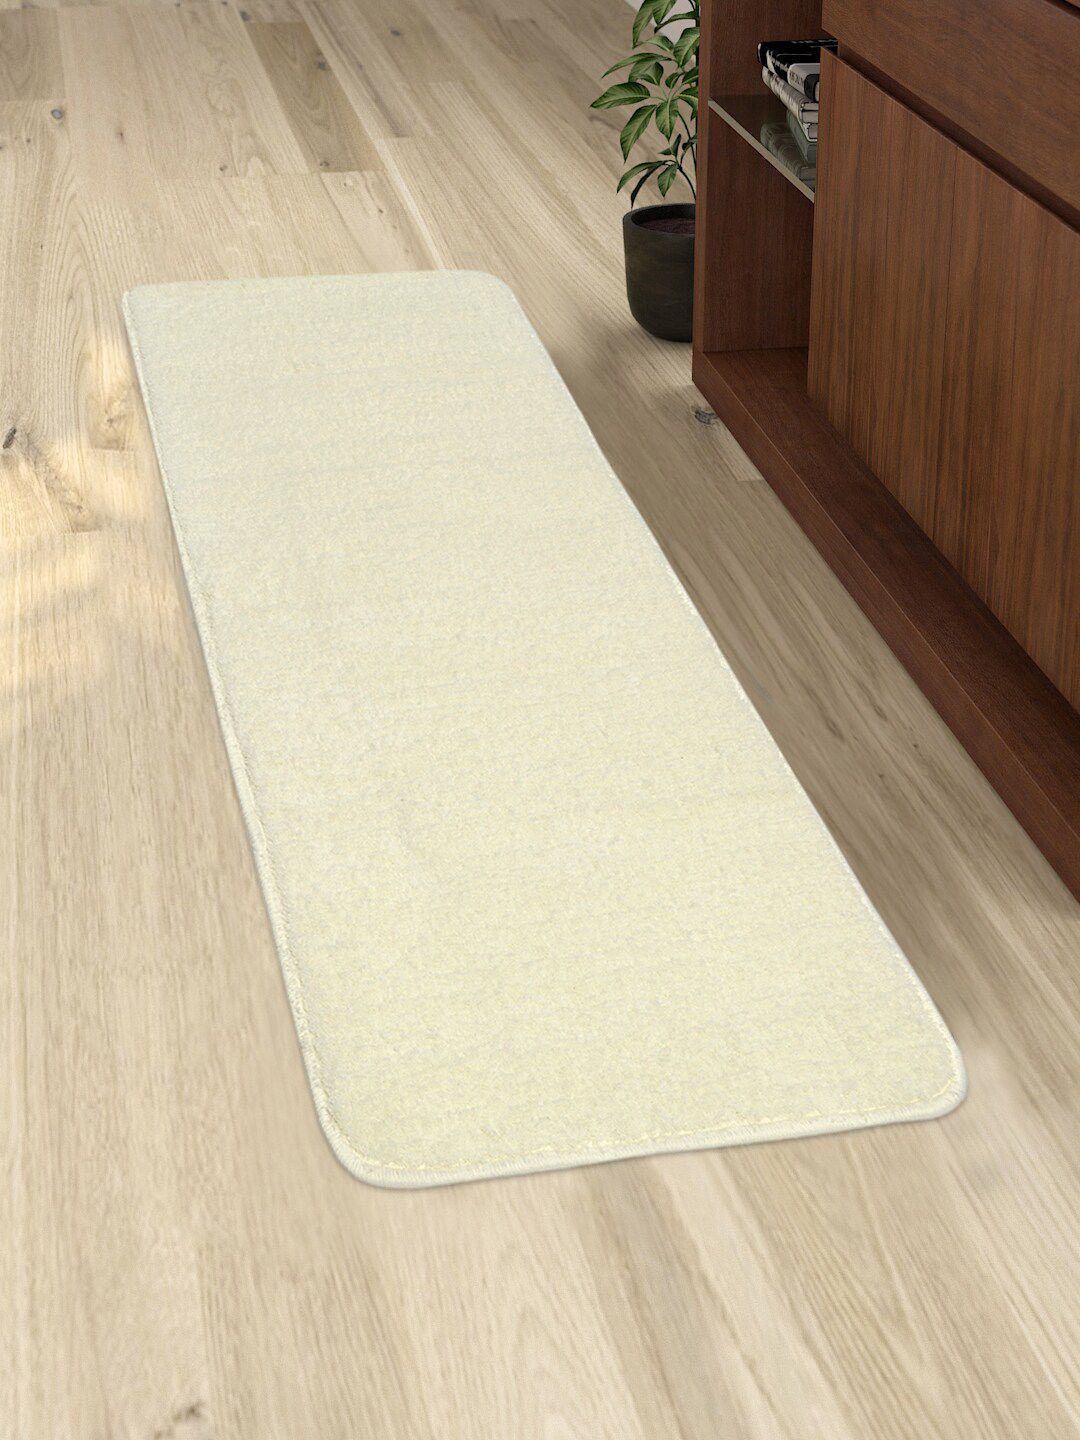 Saral Home Off-White Solid Neo Shaggy Anti-Skid Floor Runner Price in India